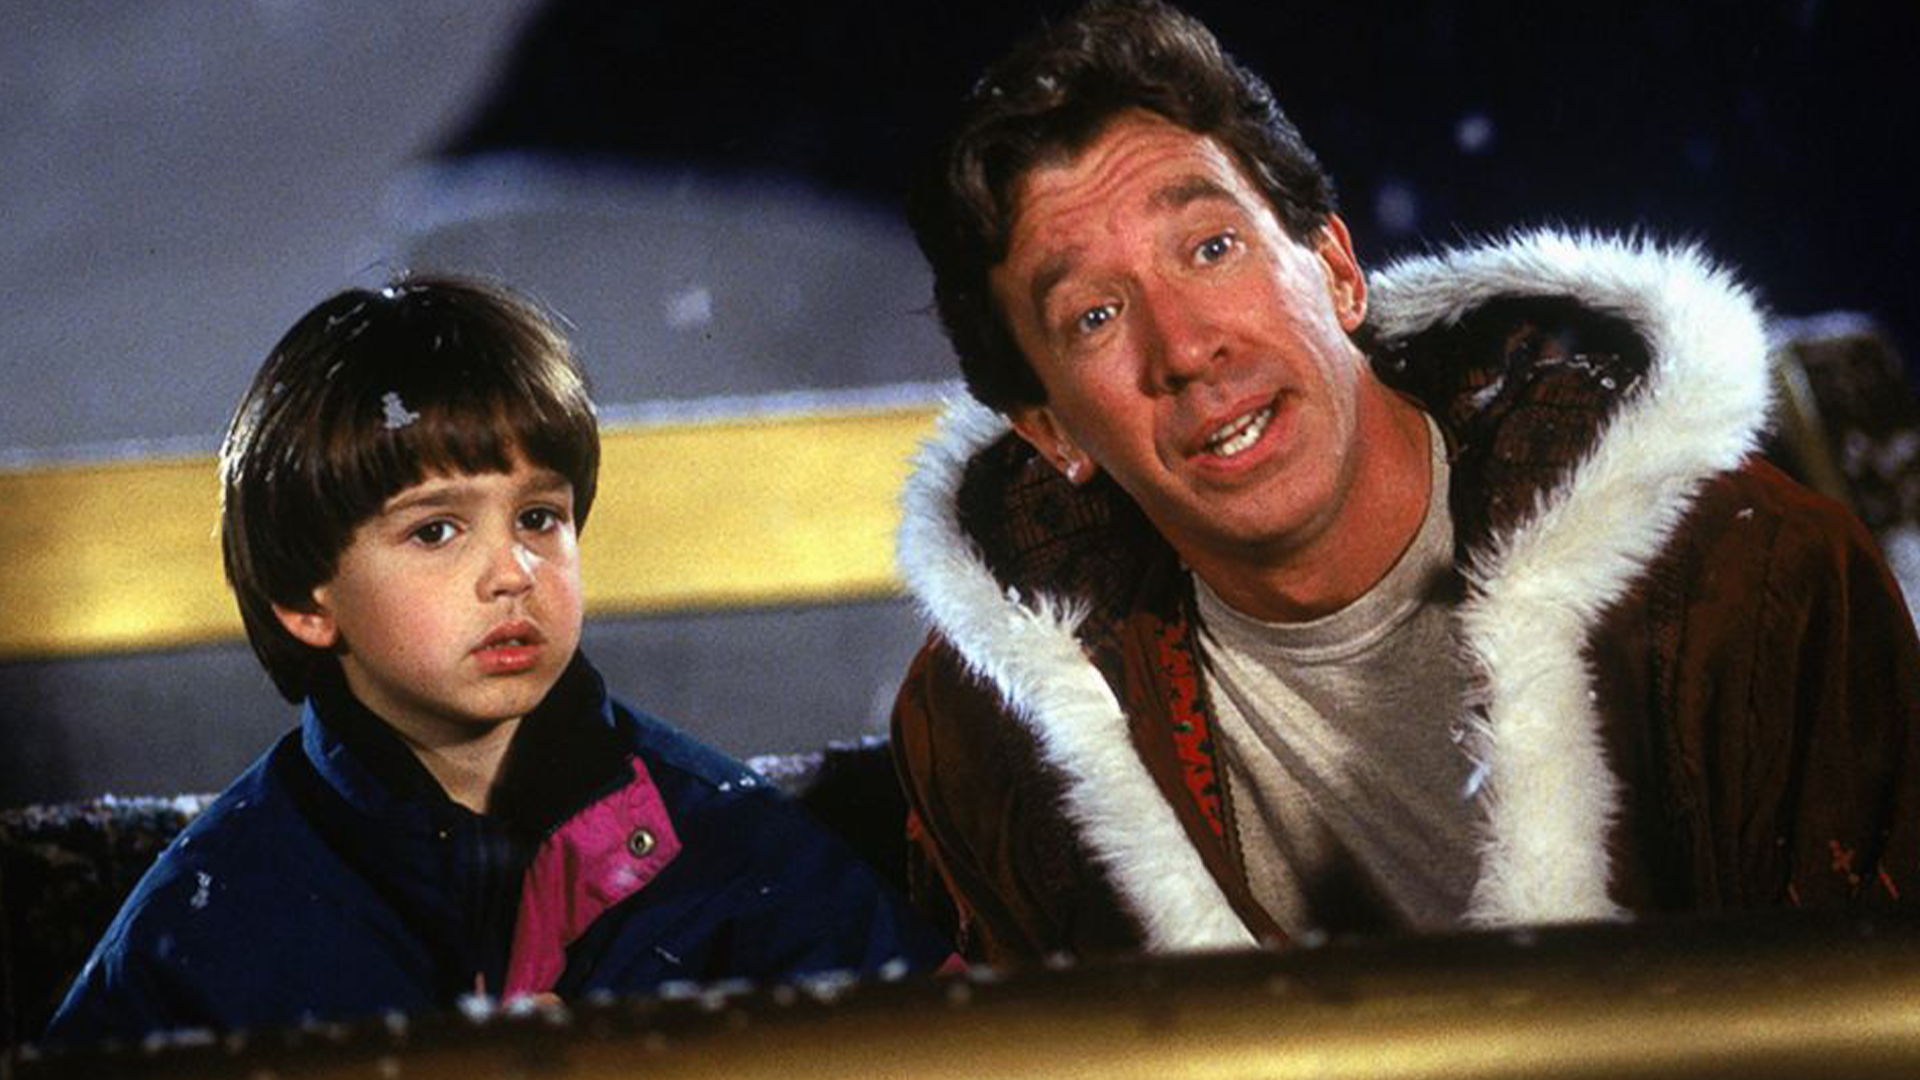 Scene from The Santa Clause 